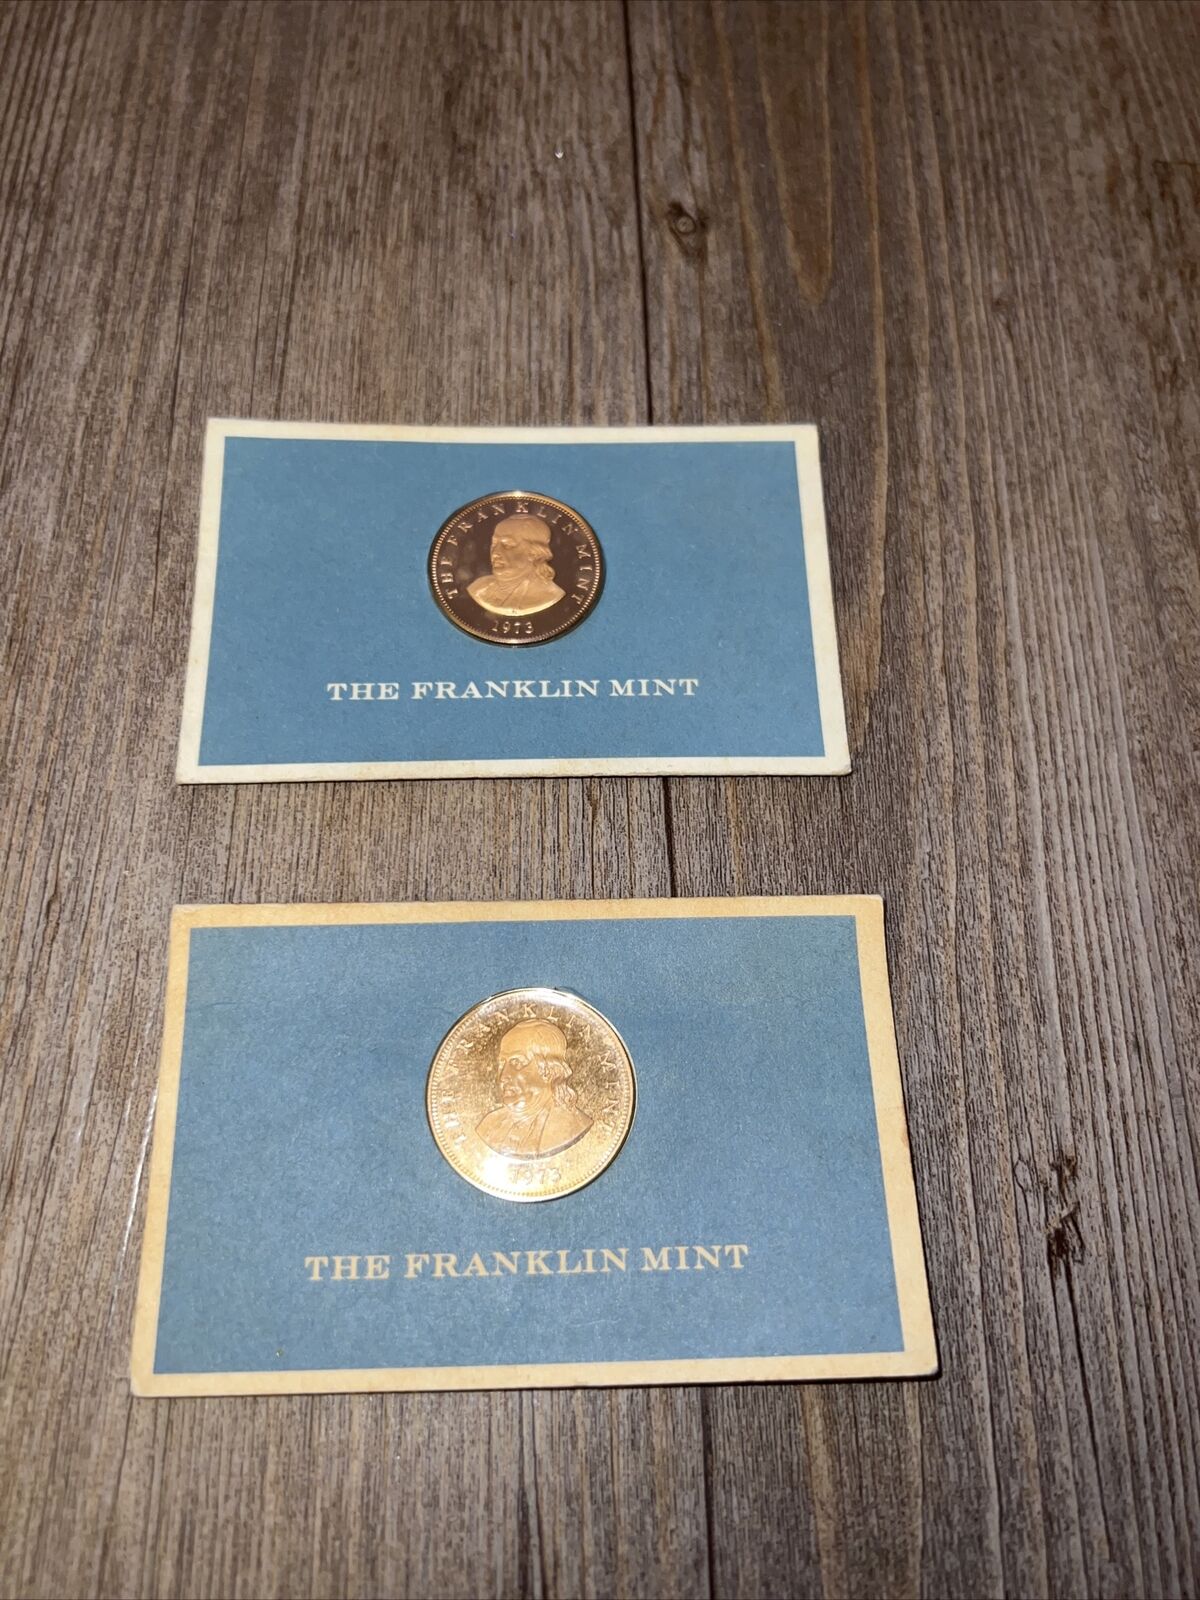 THE FRANKLIN MINT. with BEN FRANKLIN COIN BUSINESS CARD VINTAGE 1970\'s Lot Of 2